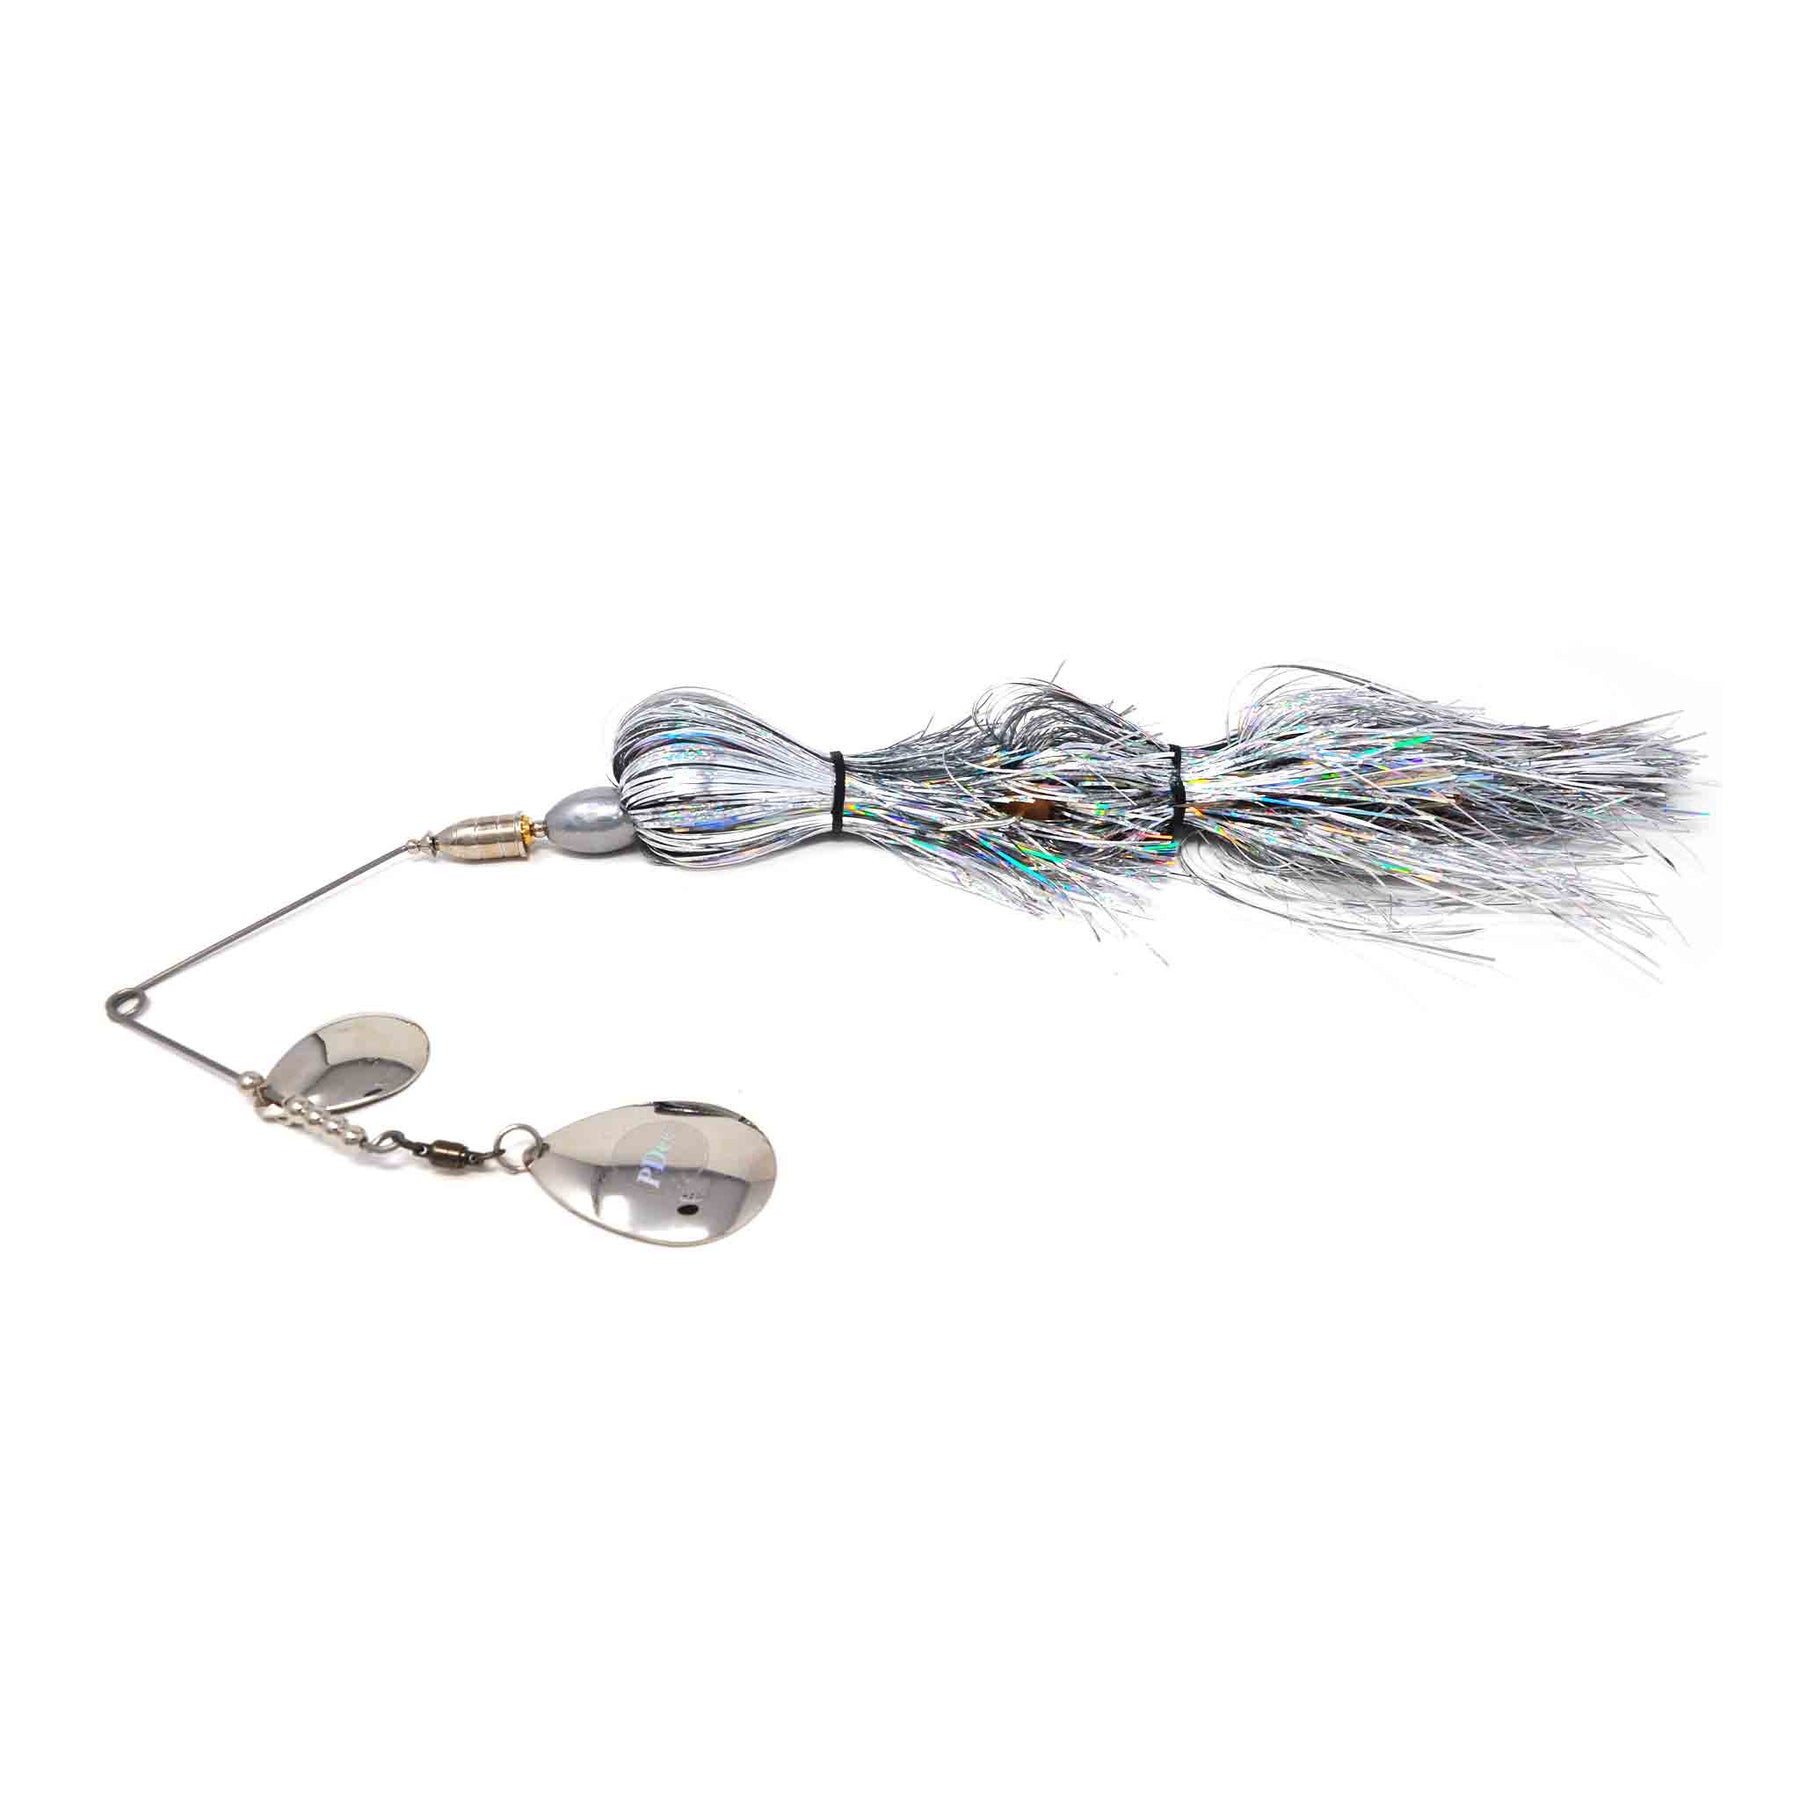 View of Spinnerbaits PDeez Bell Trolling Spinnerbait Sub Zero available at EZOKO Pike and Musky Shop